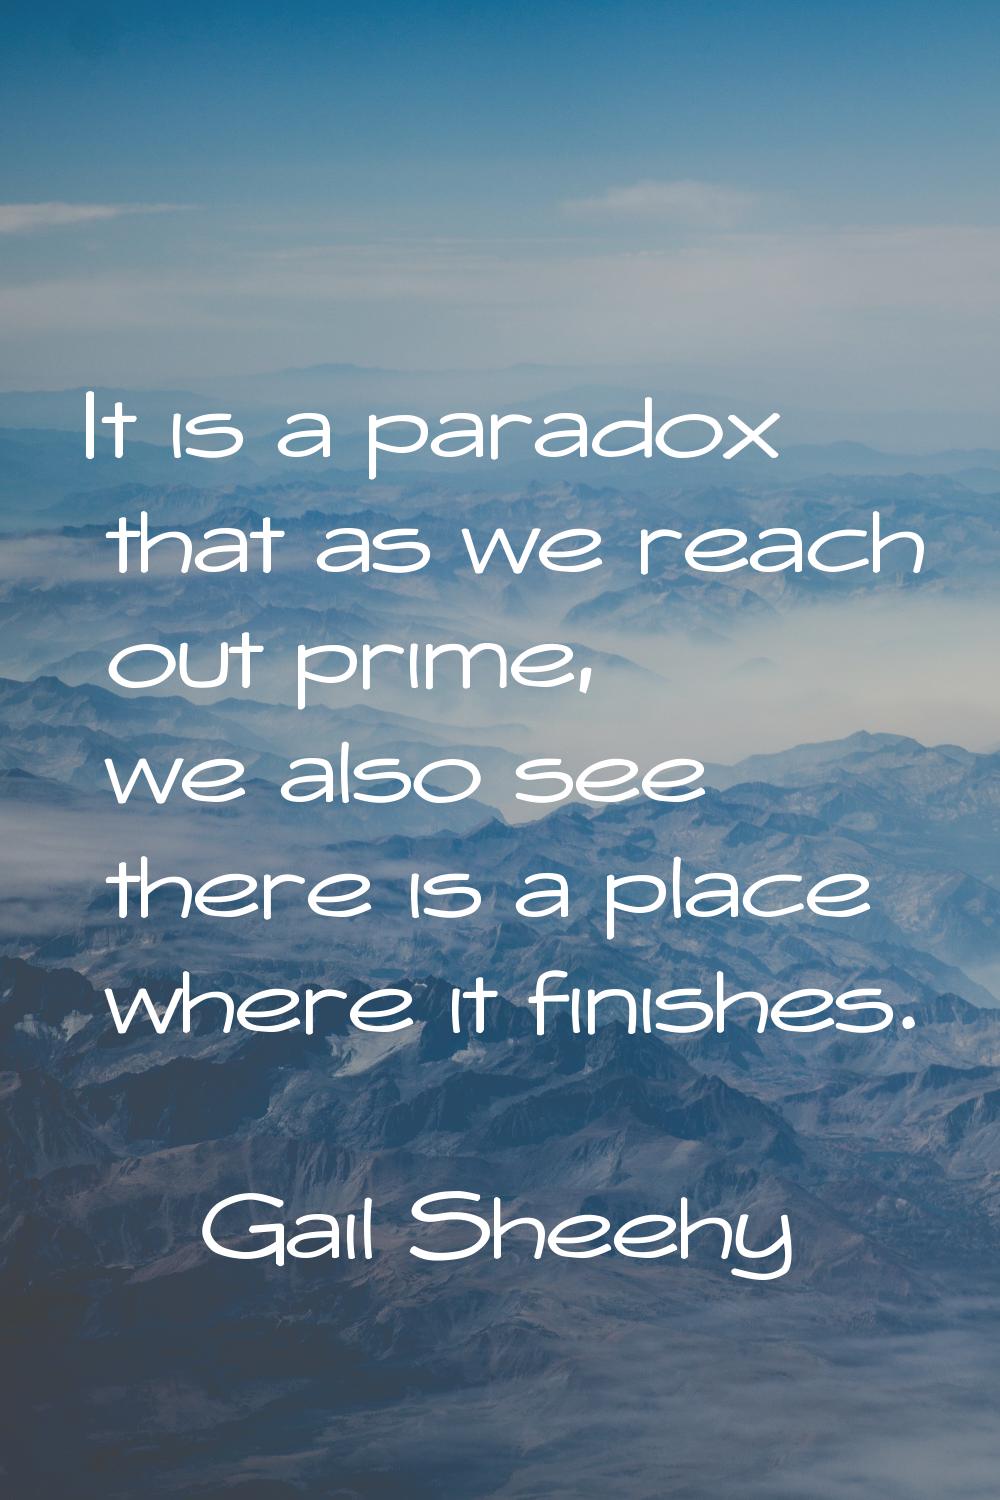 It is a paradox that as we reach out prime, we also see there is a place where it finishes.